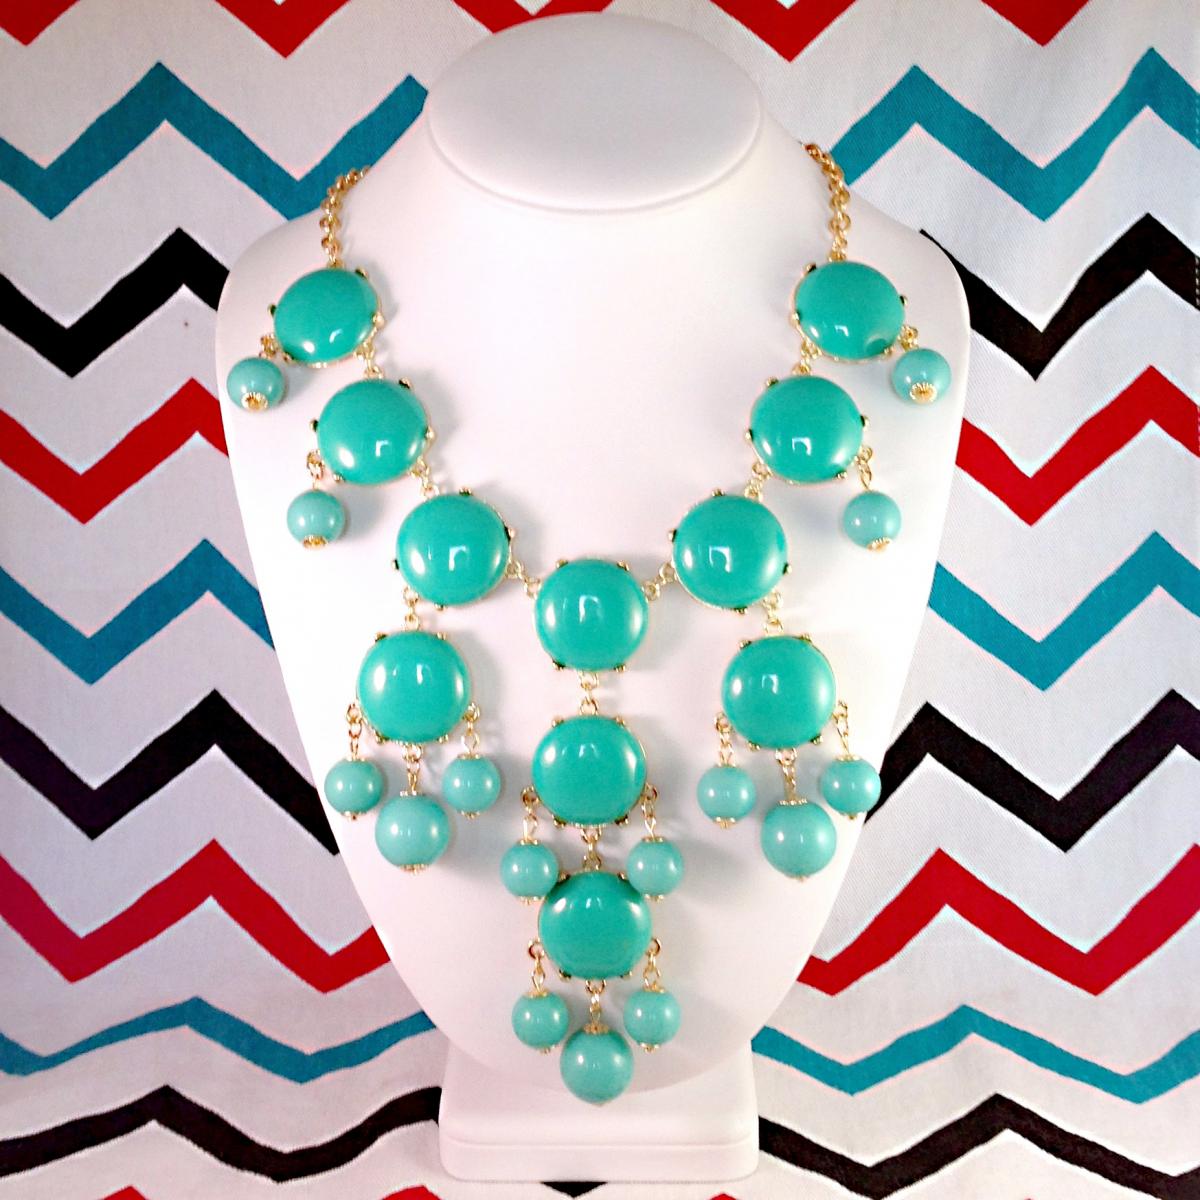 J-crew Inspired Bubble Bib Statement Necklace In Teal Turquoise - Ships From Usa!